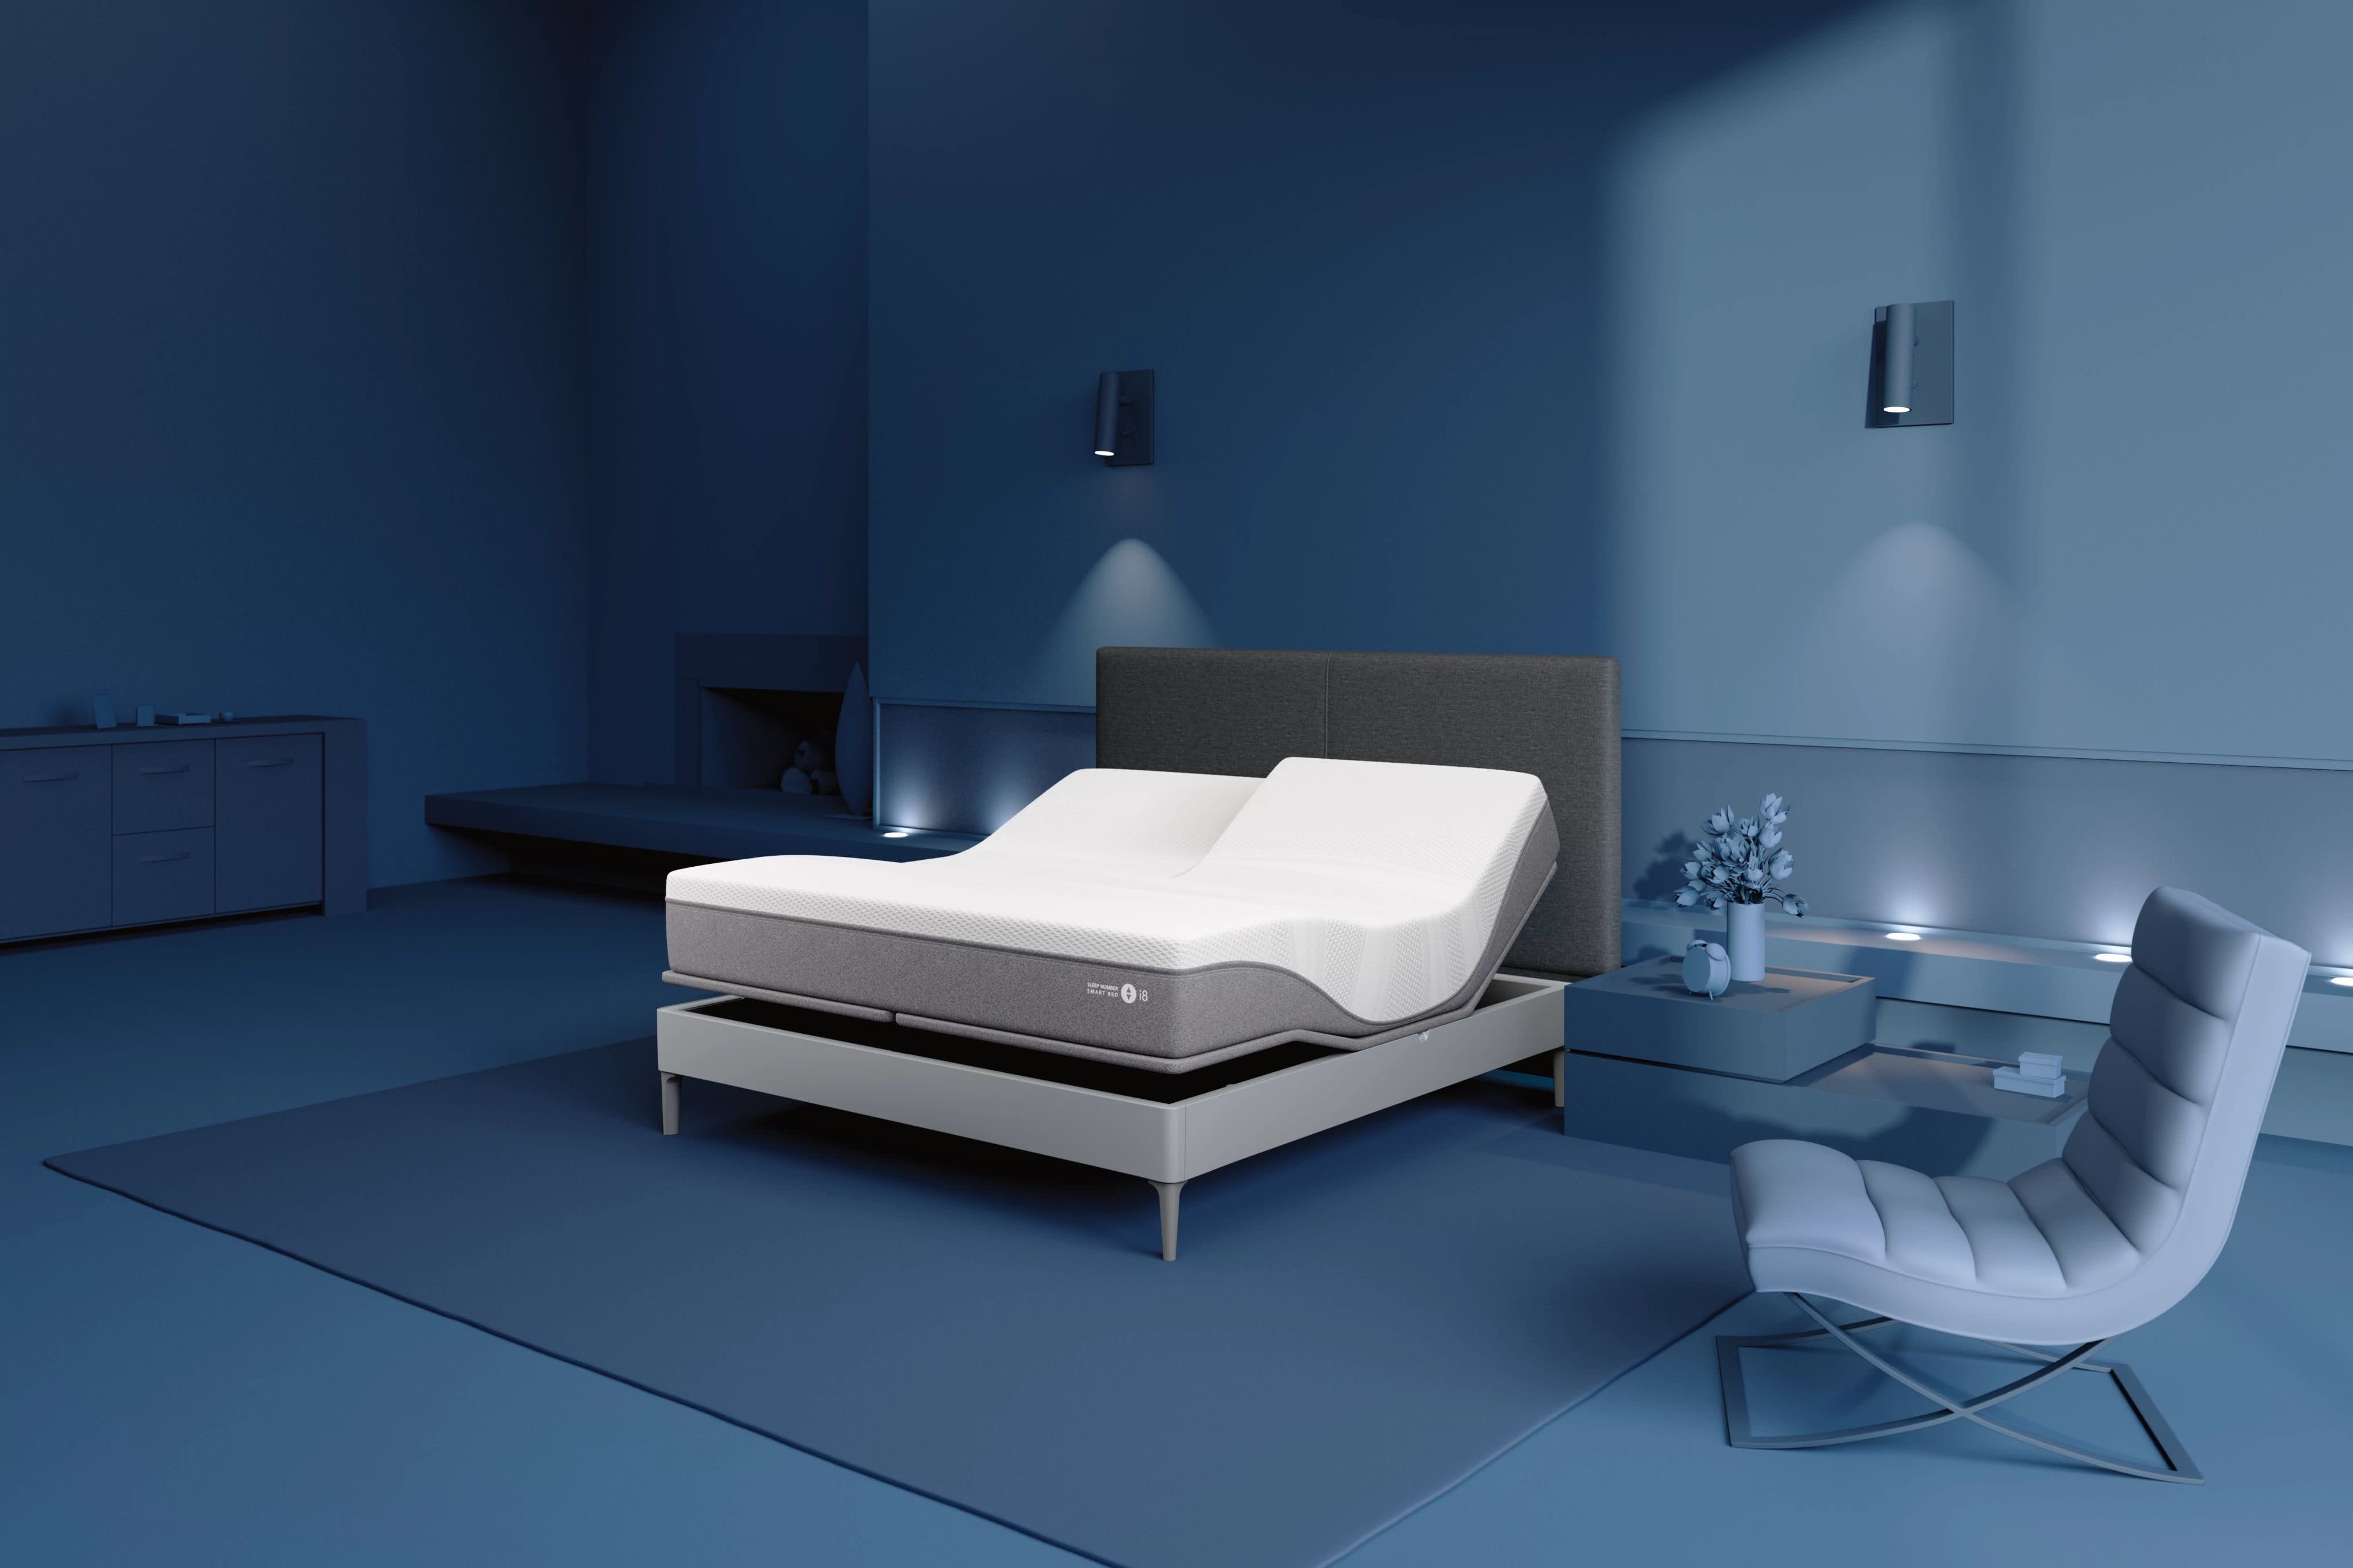 How To Buy A Bed - The Ultimate Mattress Buying Guide - Sleep Number